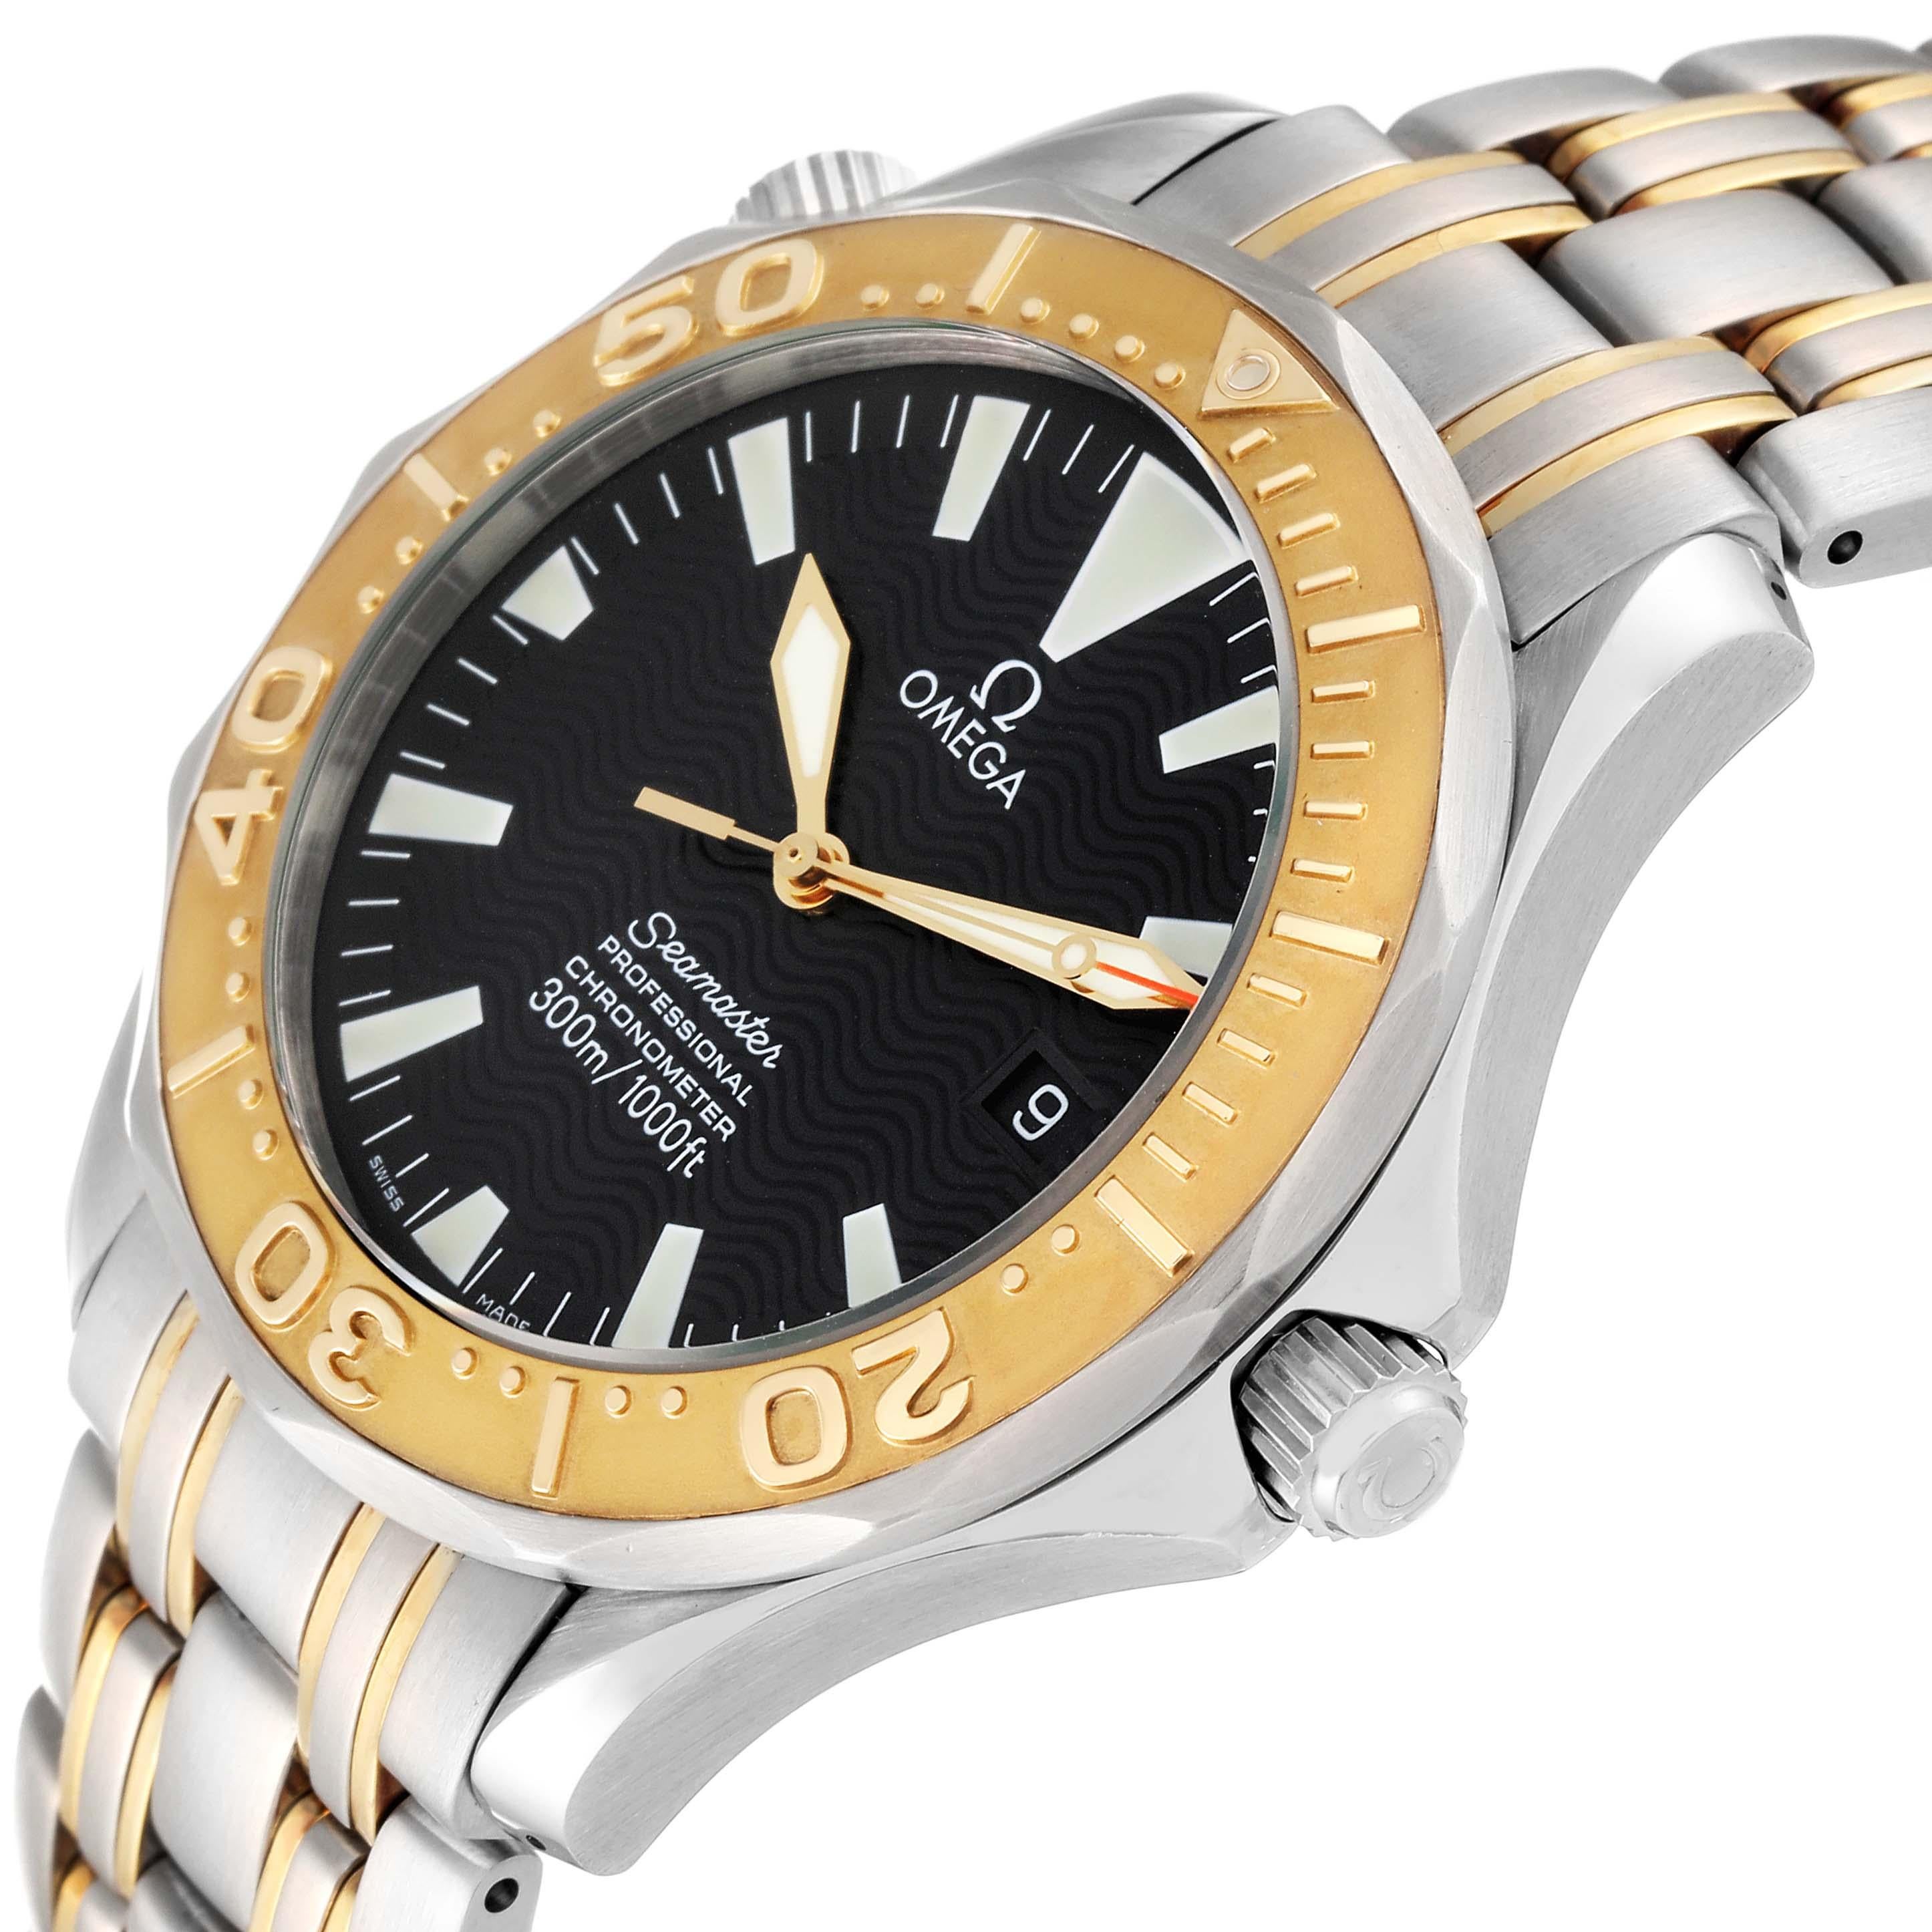 Men's Omega Seamaster Steel Yellow Gold Automatic Mens Watch 2455.50.00 Card